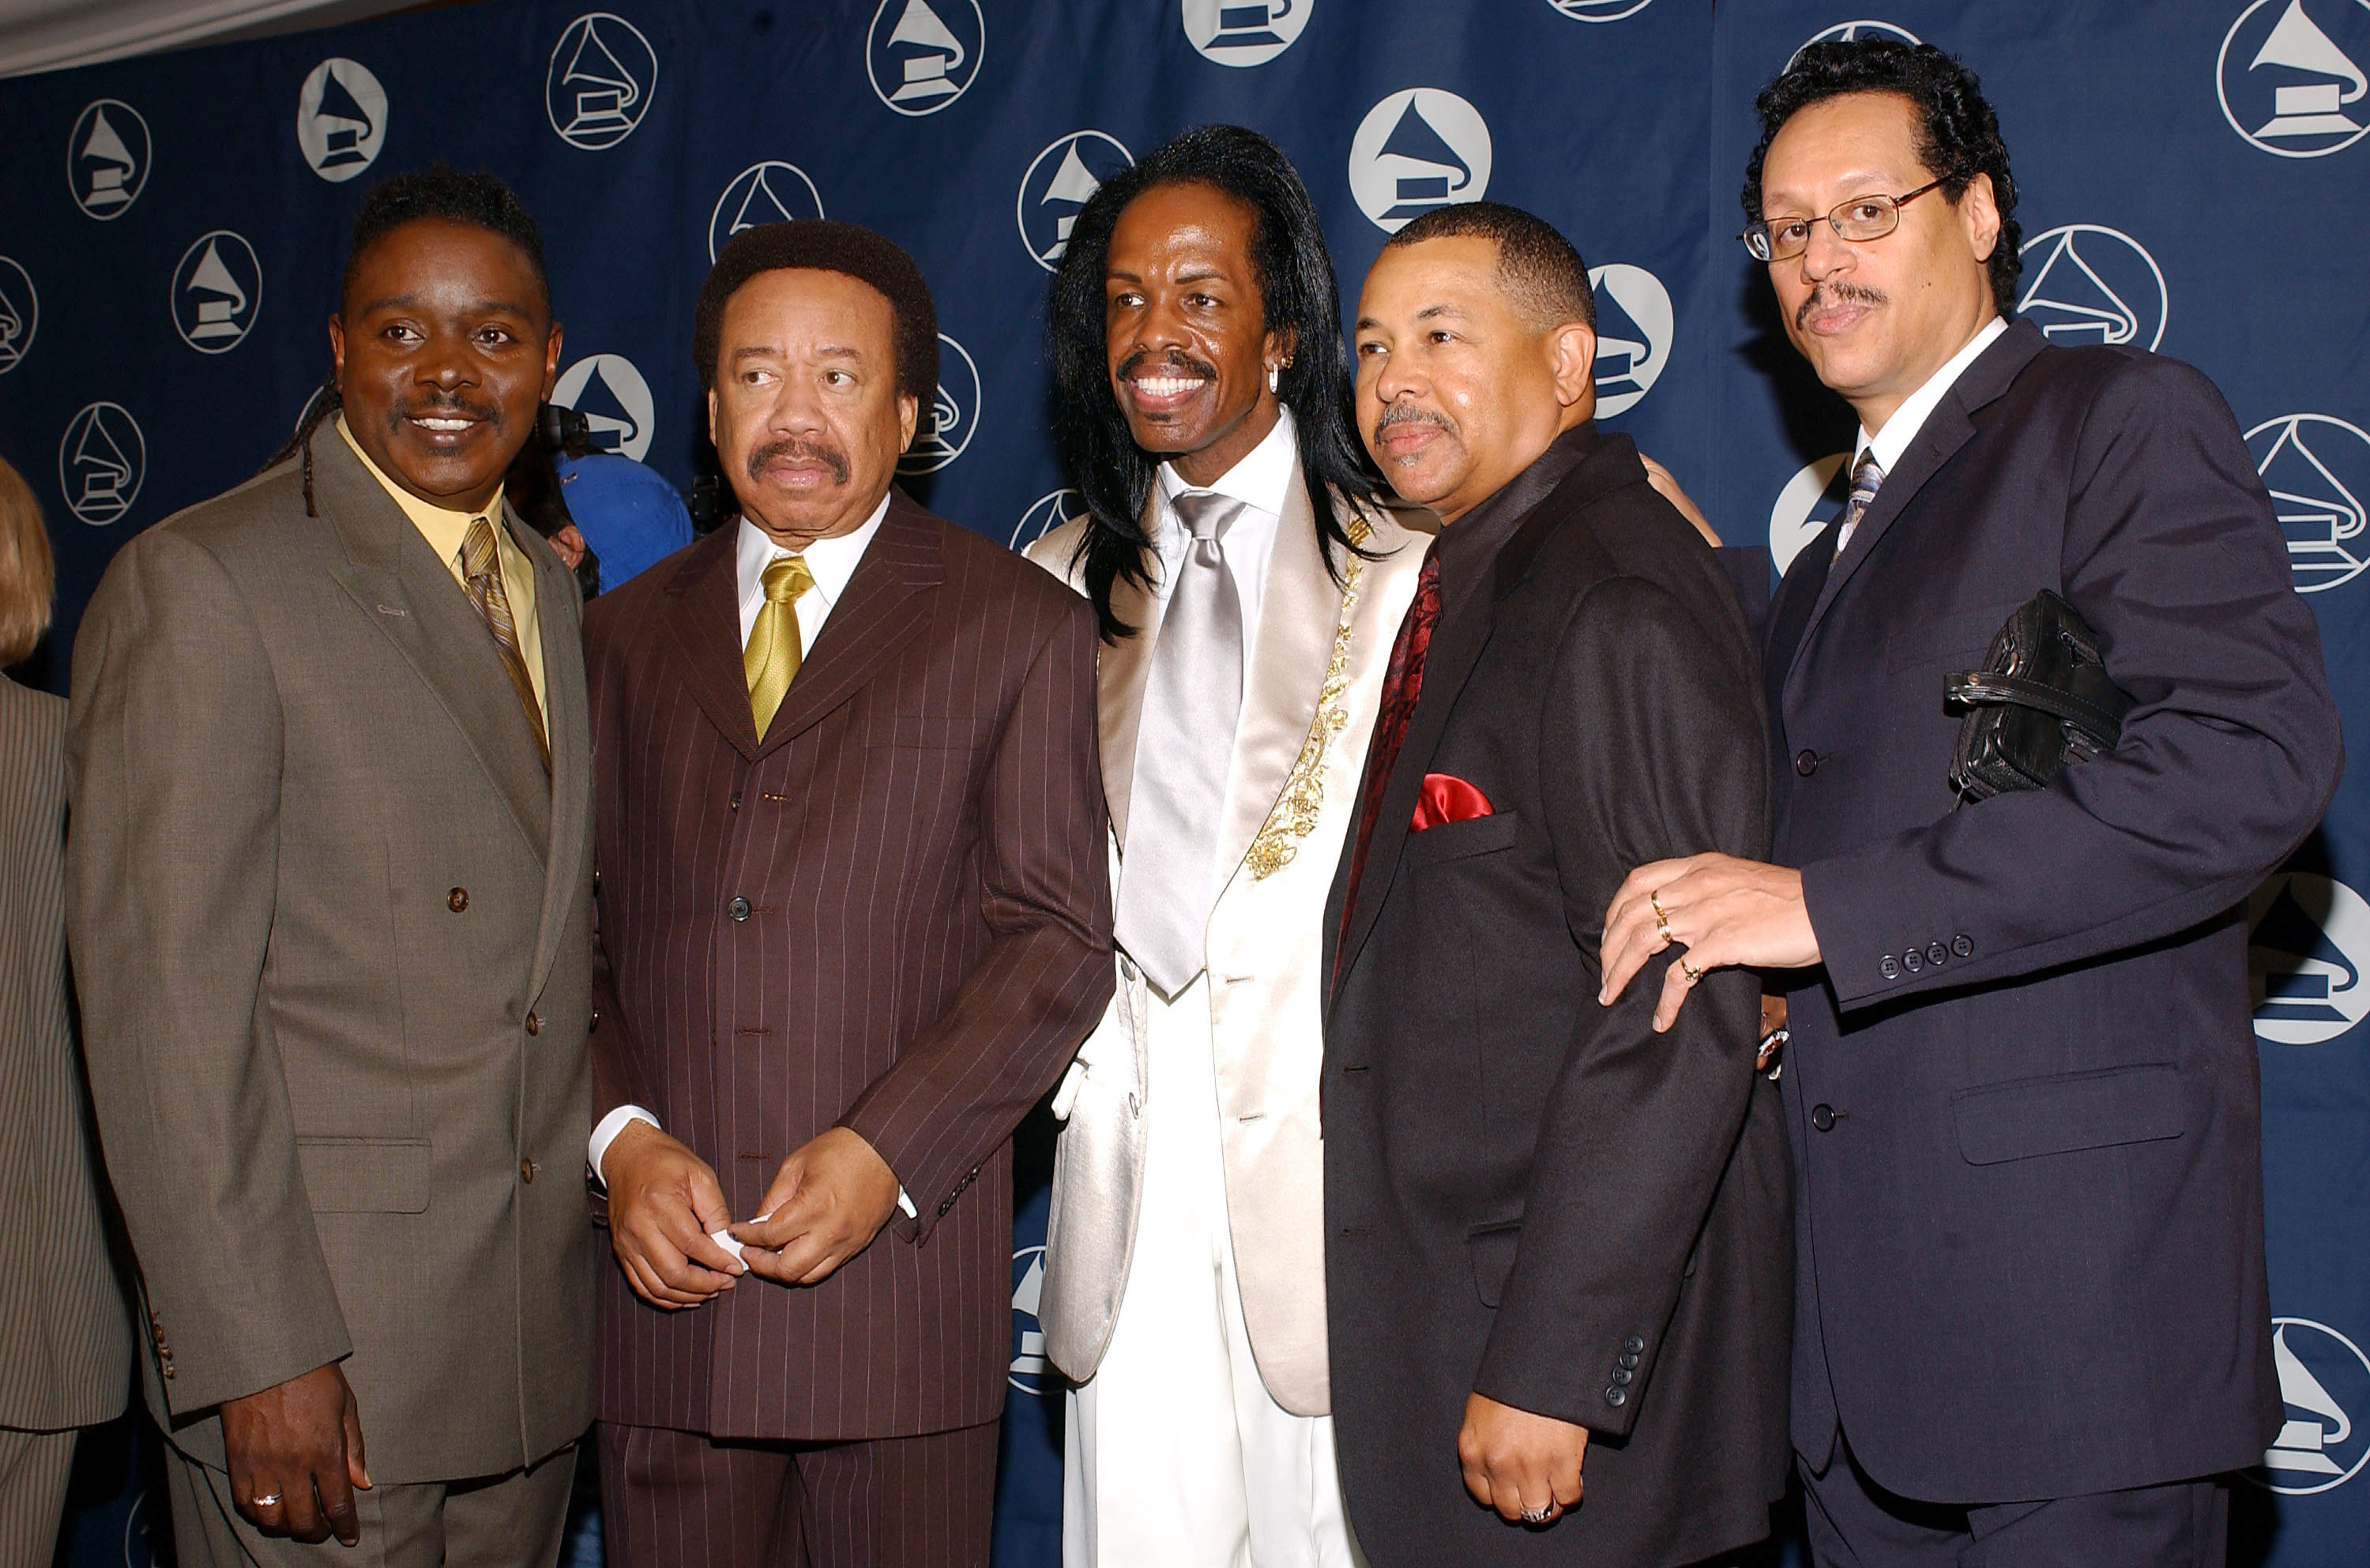 Earth, Wind & Fire Members Now Who Is Still Alive Today?